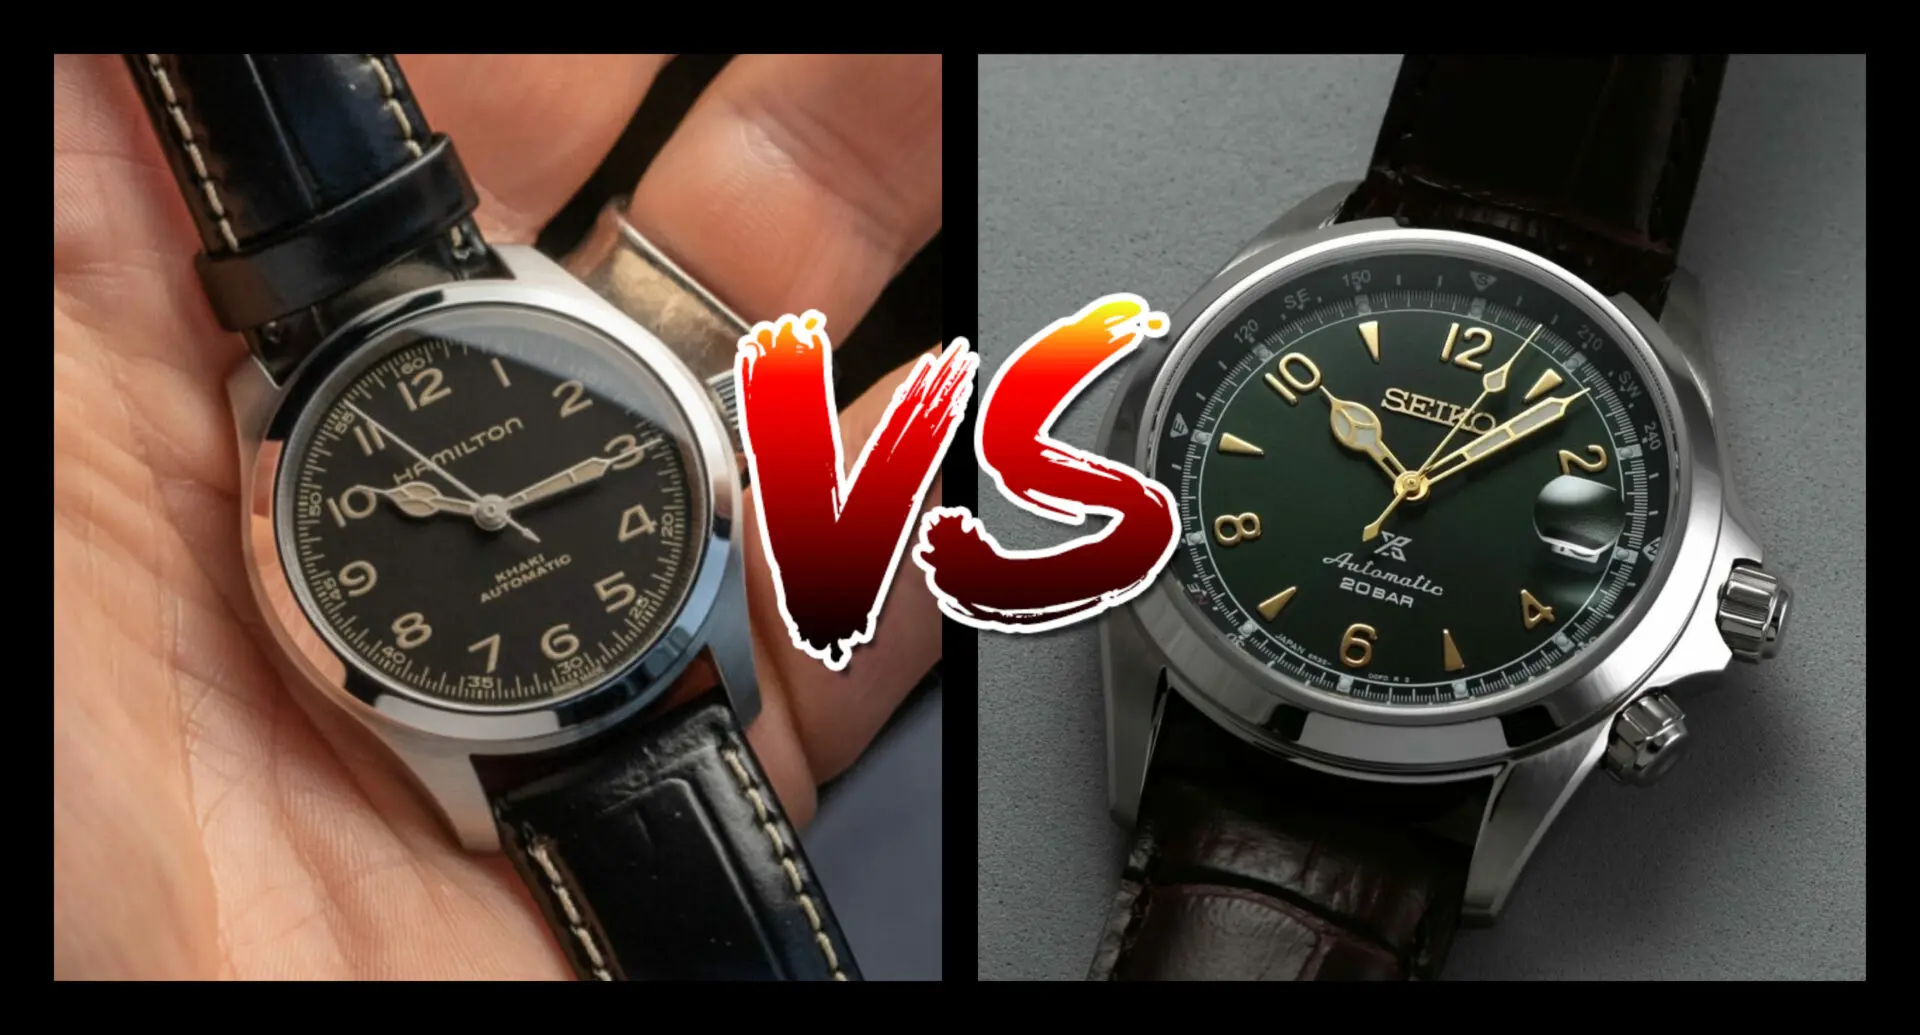 The Hamilton Murph comes up against the Alpinist SPB121 - and Tide Watches